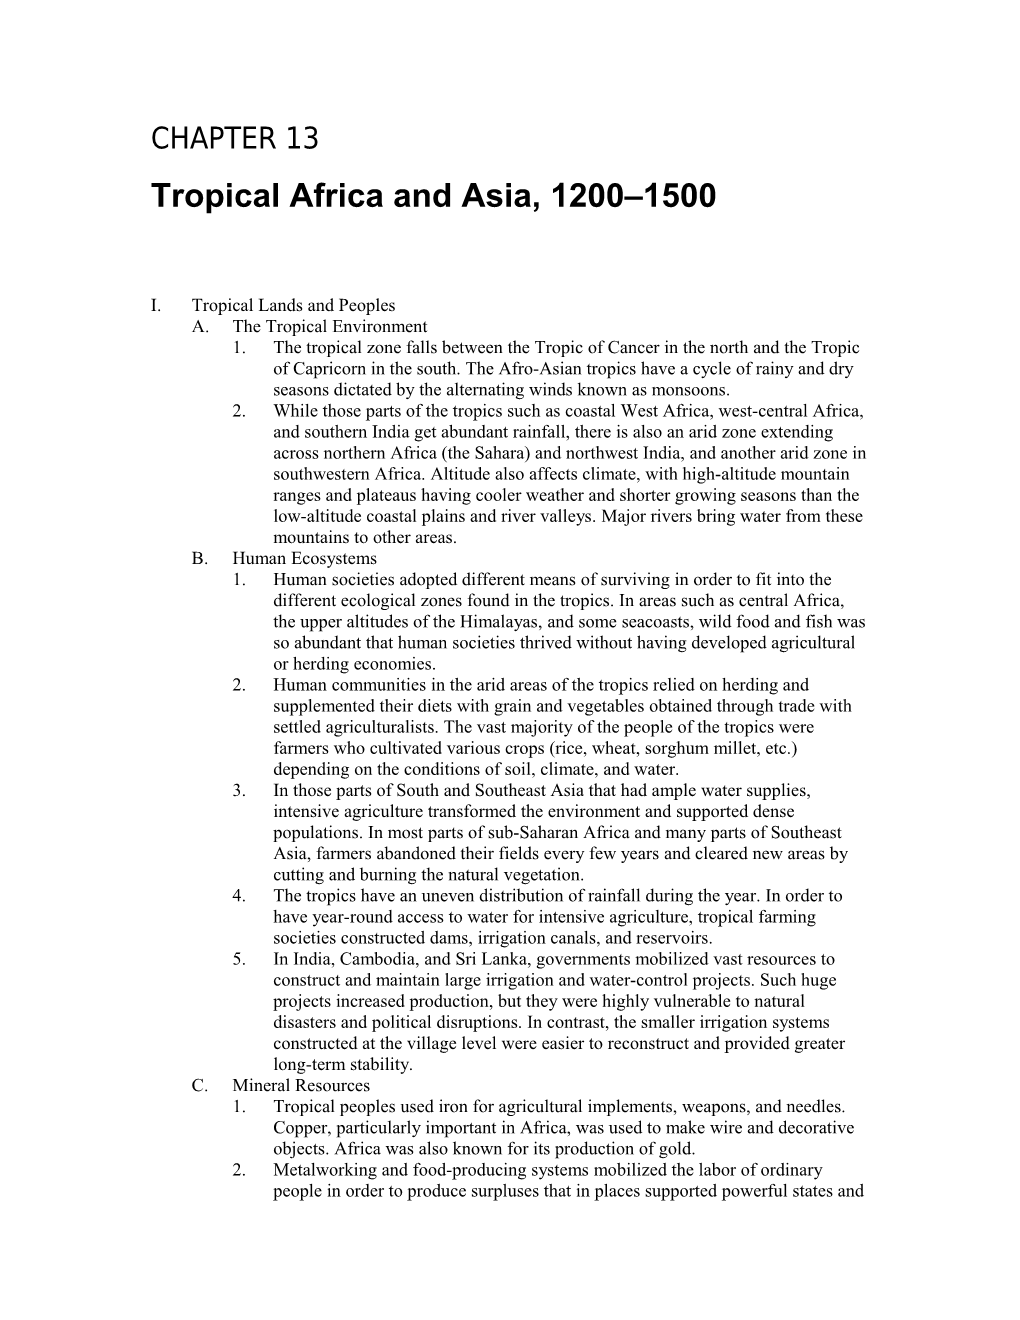 Tropical Africa and Asia, 1200 1500